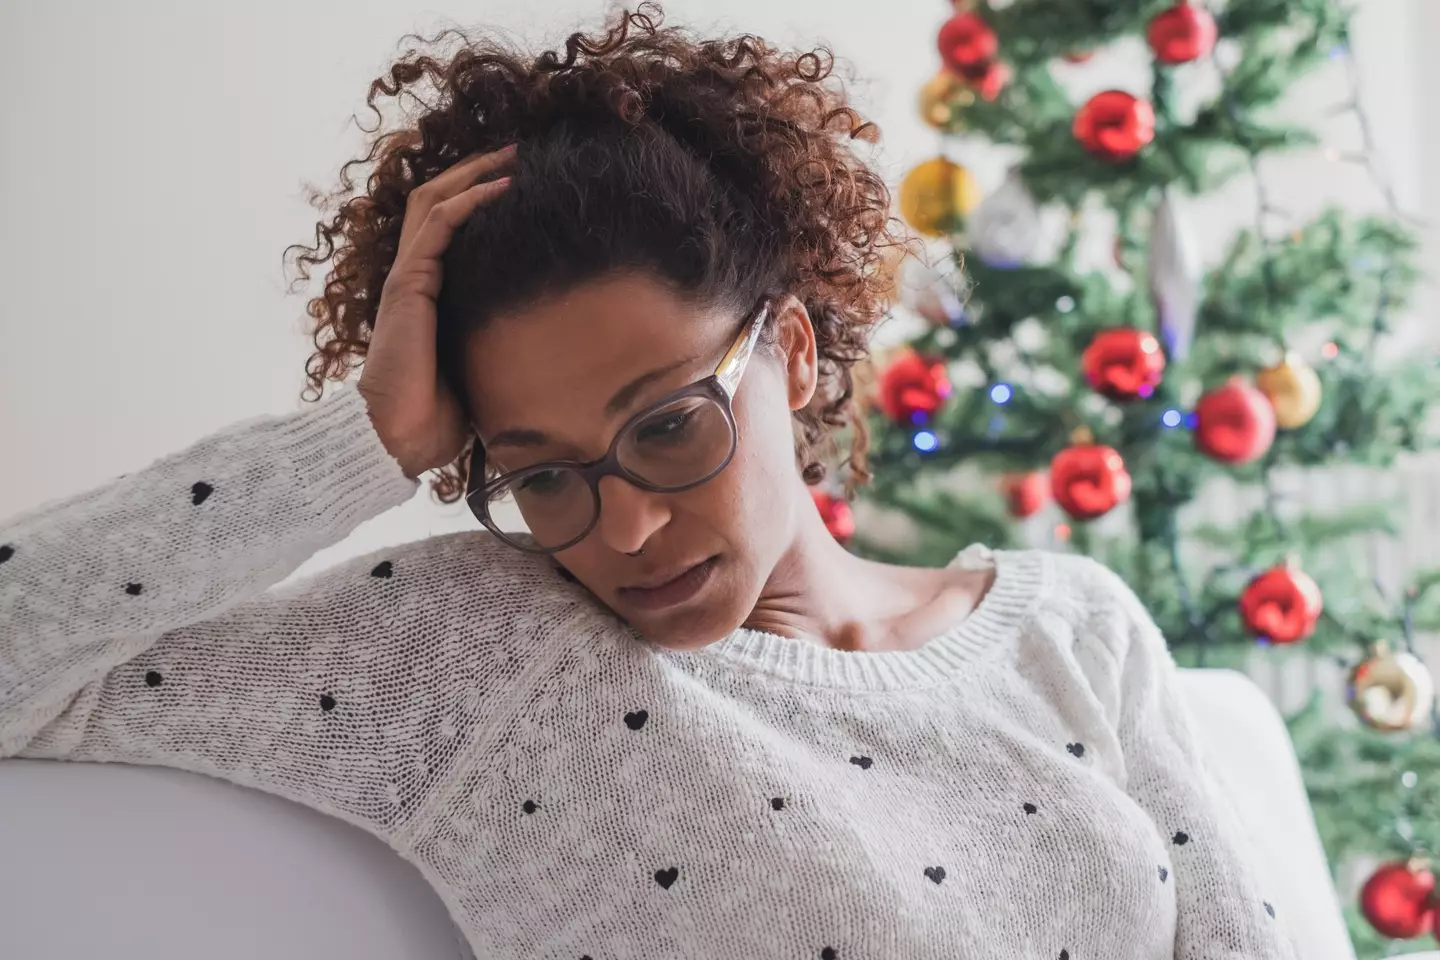 People had to spend Christmas apart from their loved ones last year (